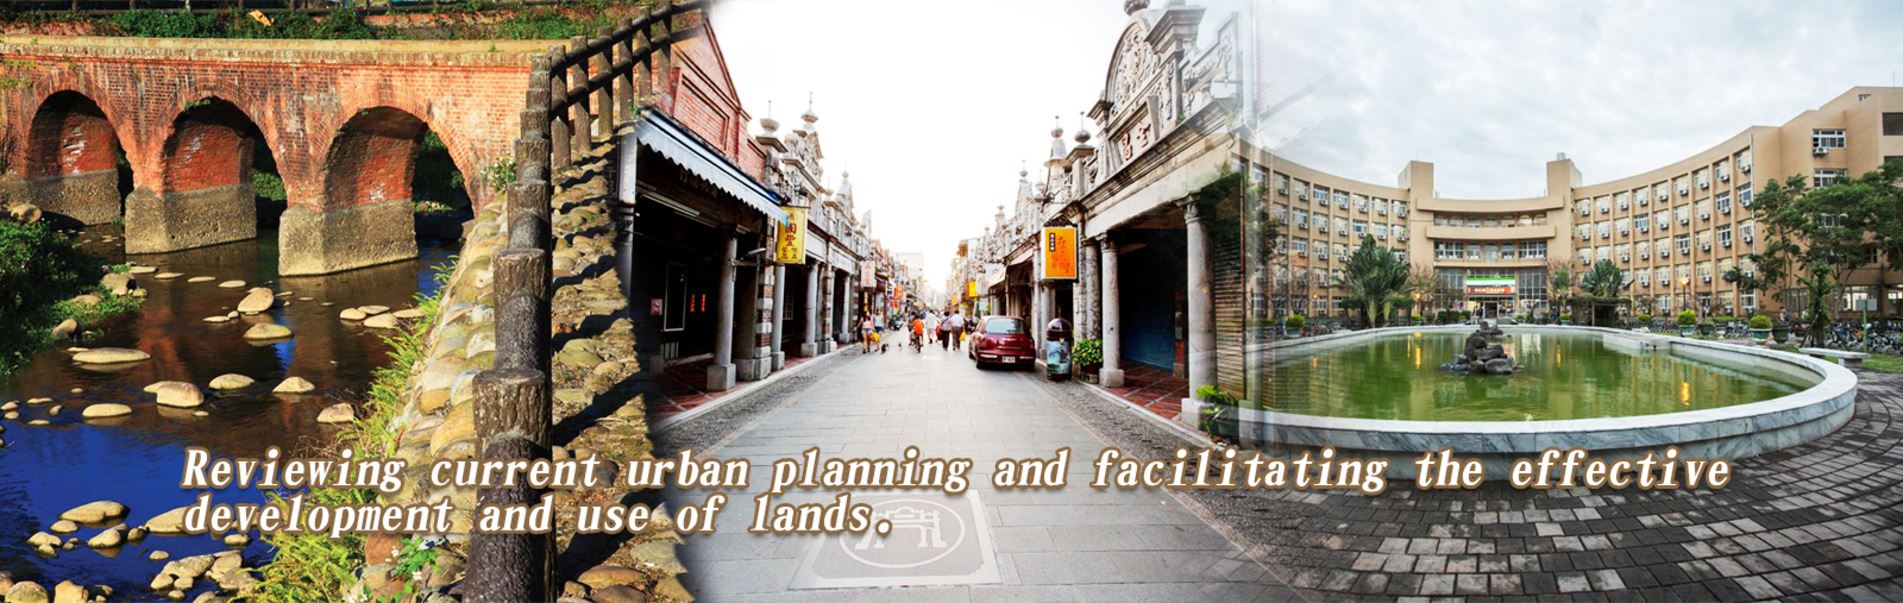 Reviewing current urban planing and facilitating the effective development and use of lands.